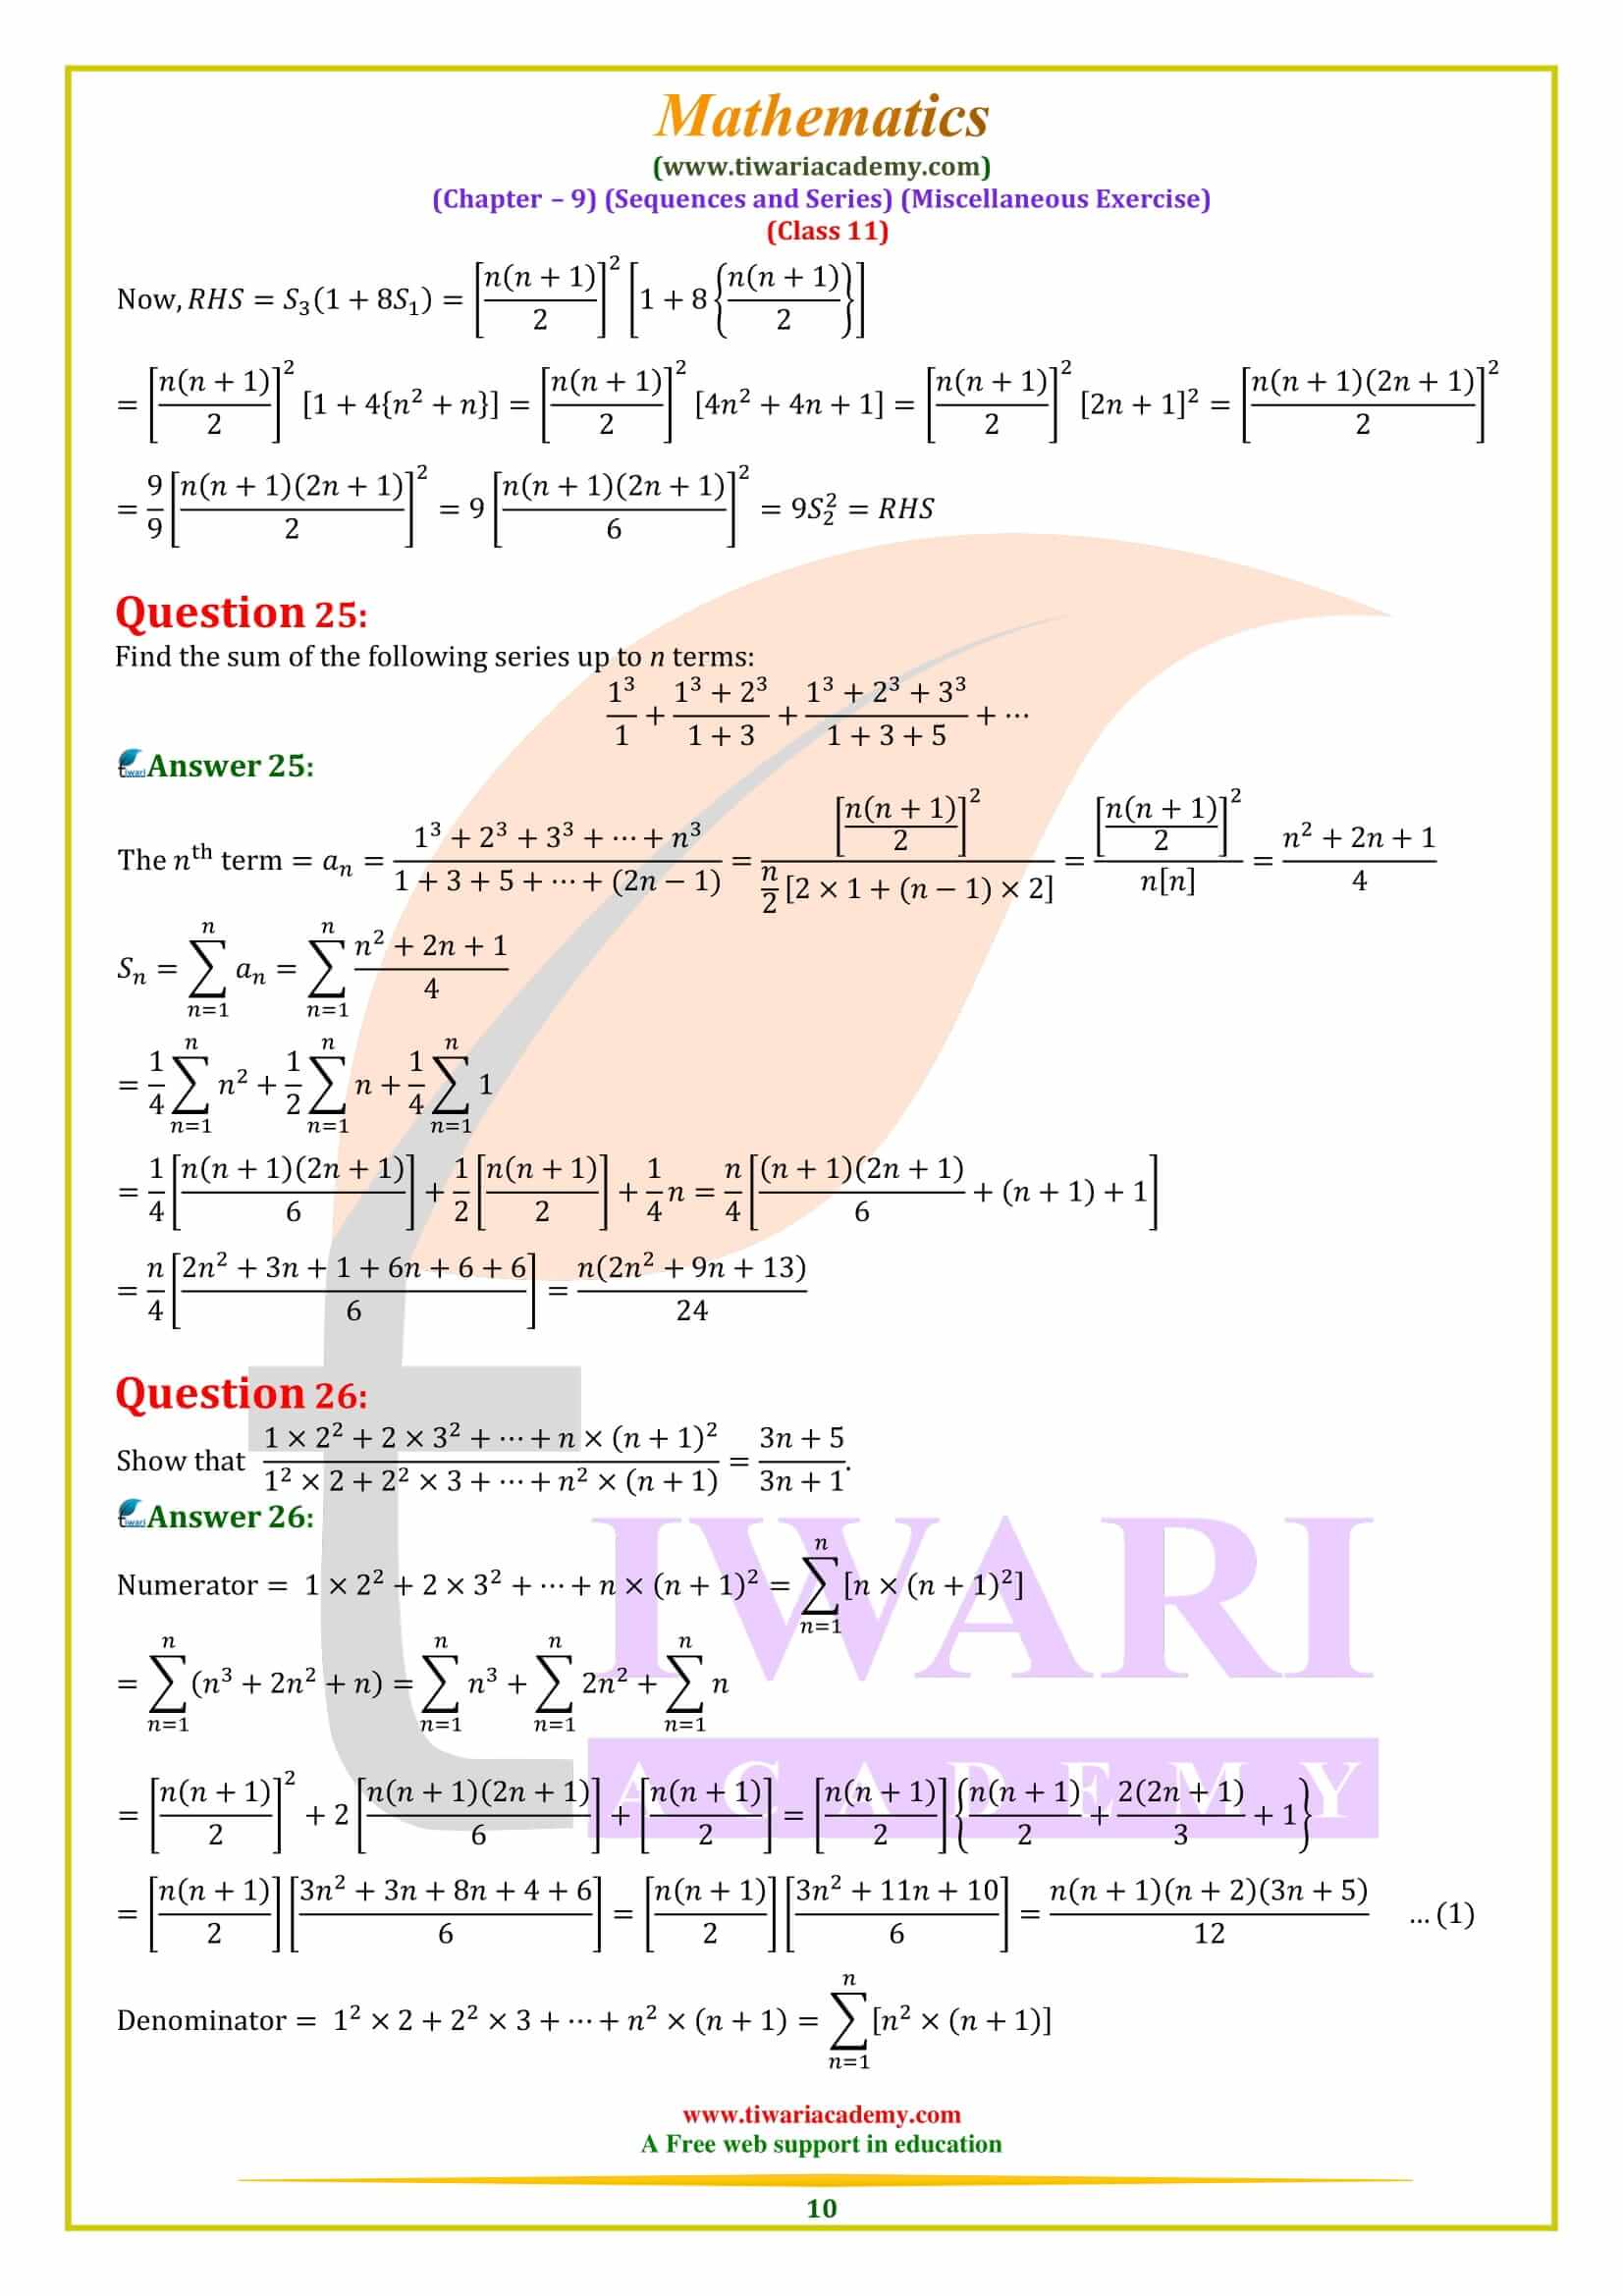 NCERT Solutions for Class 11 Maths Chapter 9 Miscellaneous Exercise question answers